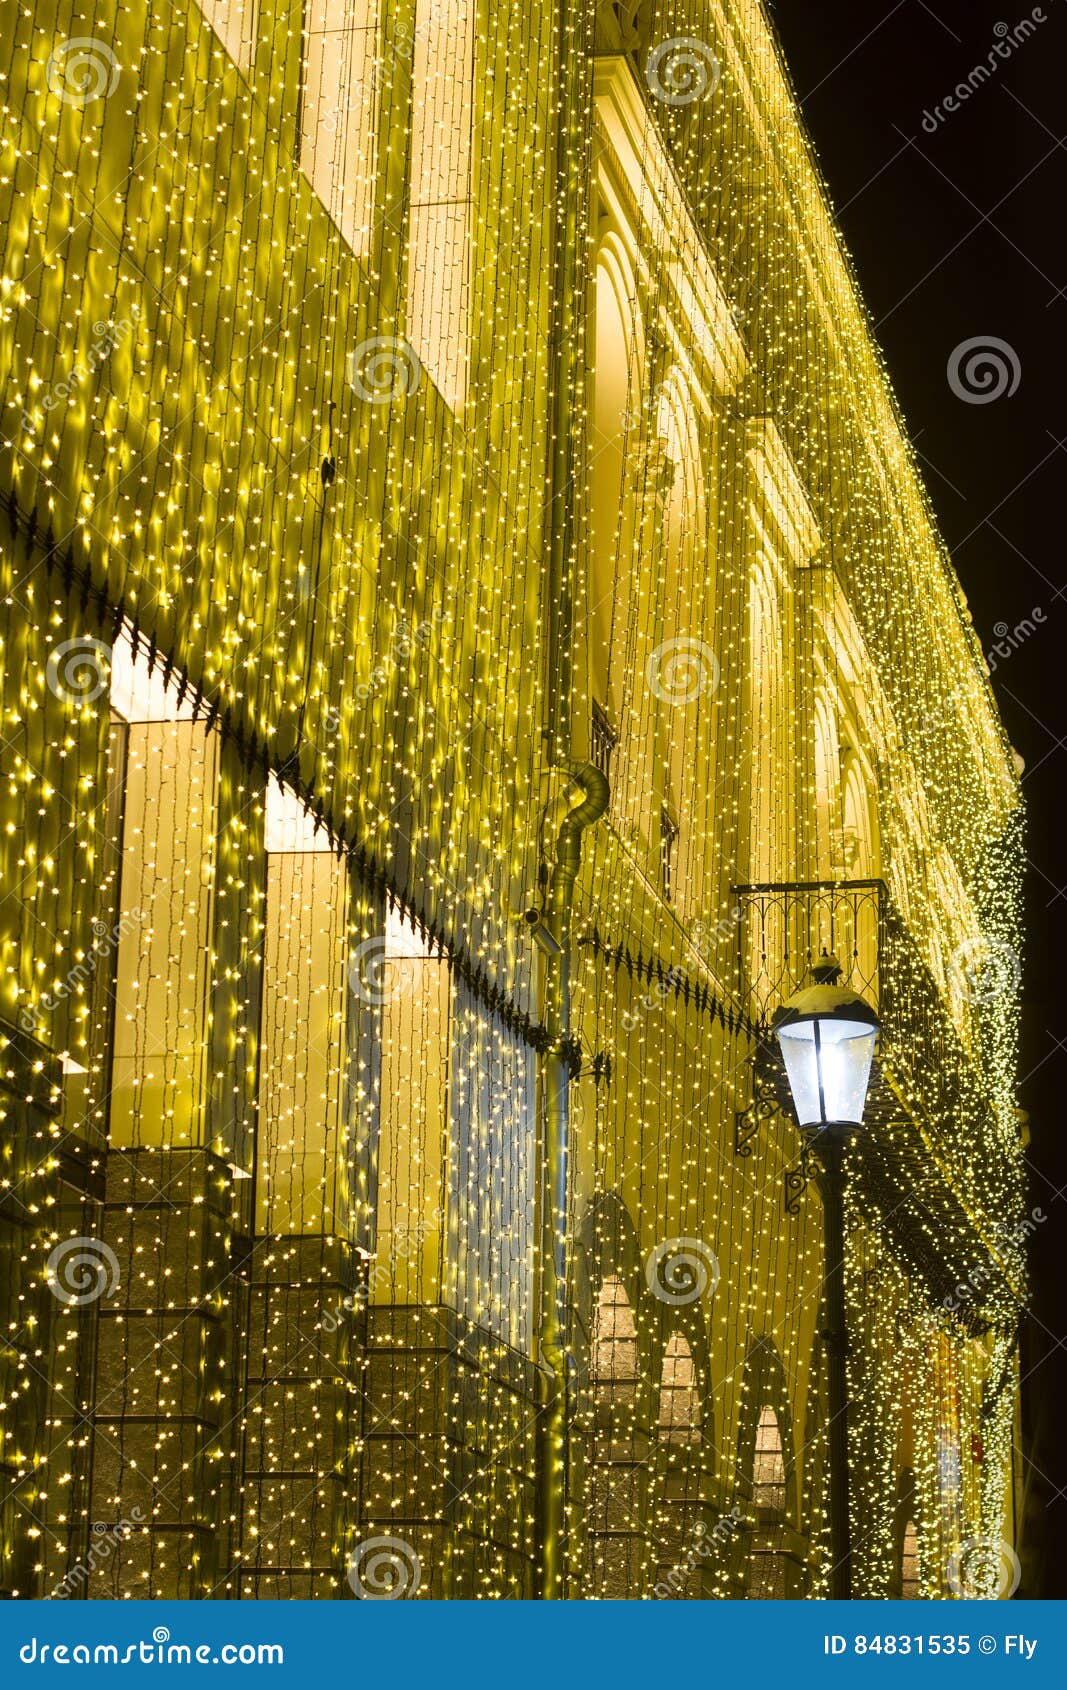 Night Scene with Building Covered in Led Lights Stock Image - Image of ...